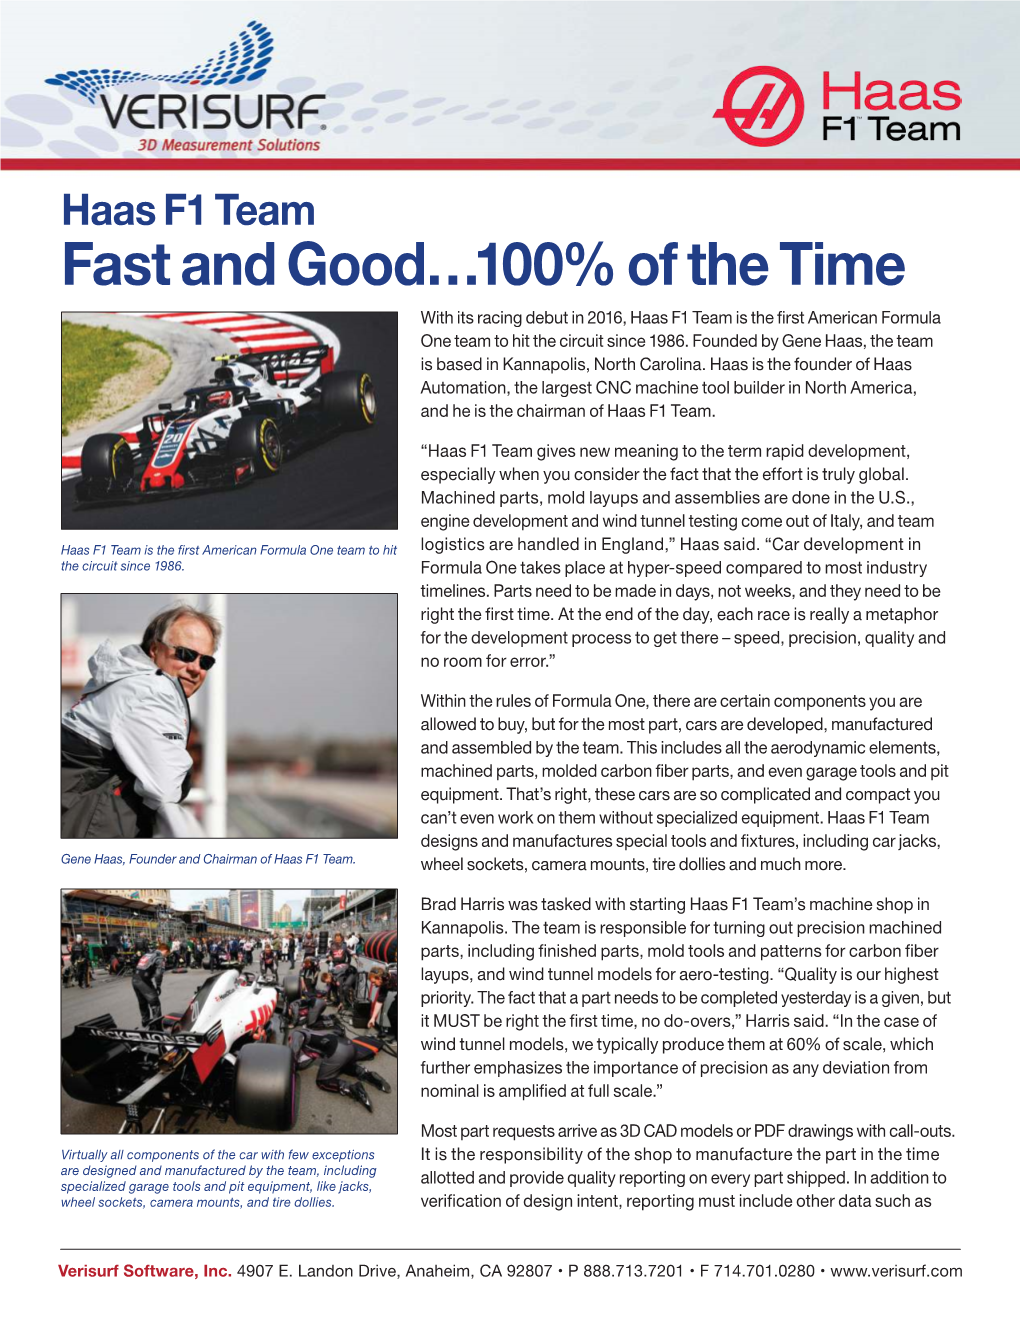 Haas F1 Team Fast and Good…100% of the Time with Its Racing Debut in 2016, Haas F1 Team Is the First American Formula One Team to Hit the Circuit Since 1986